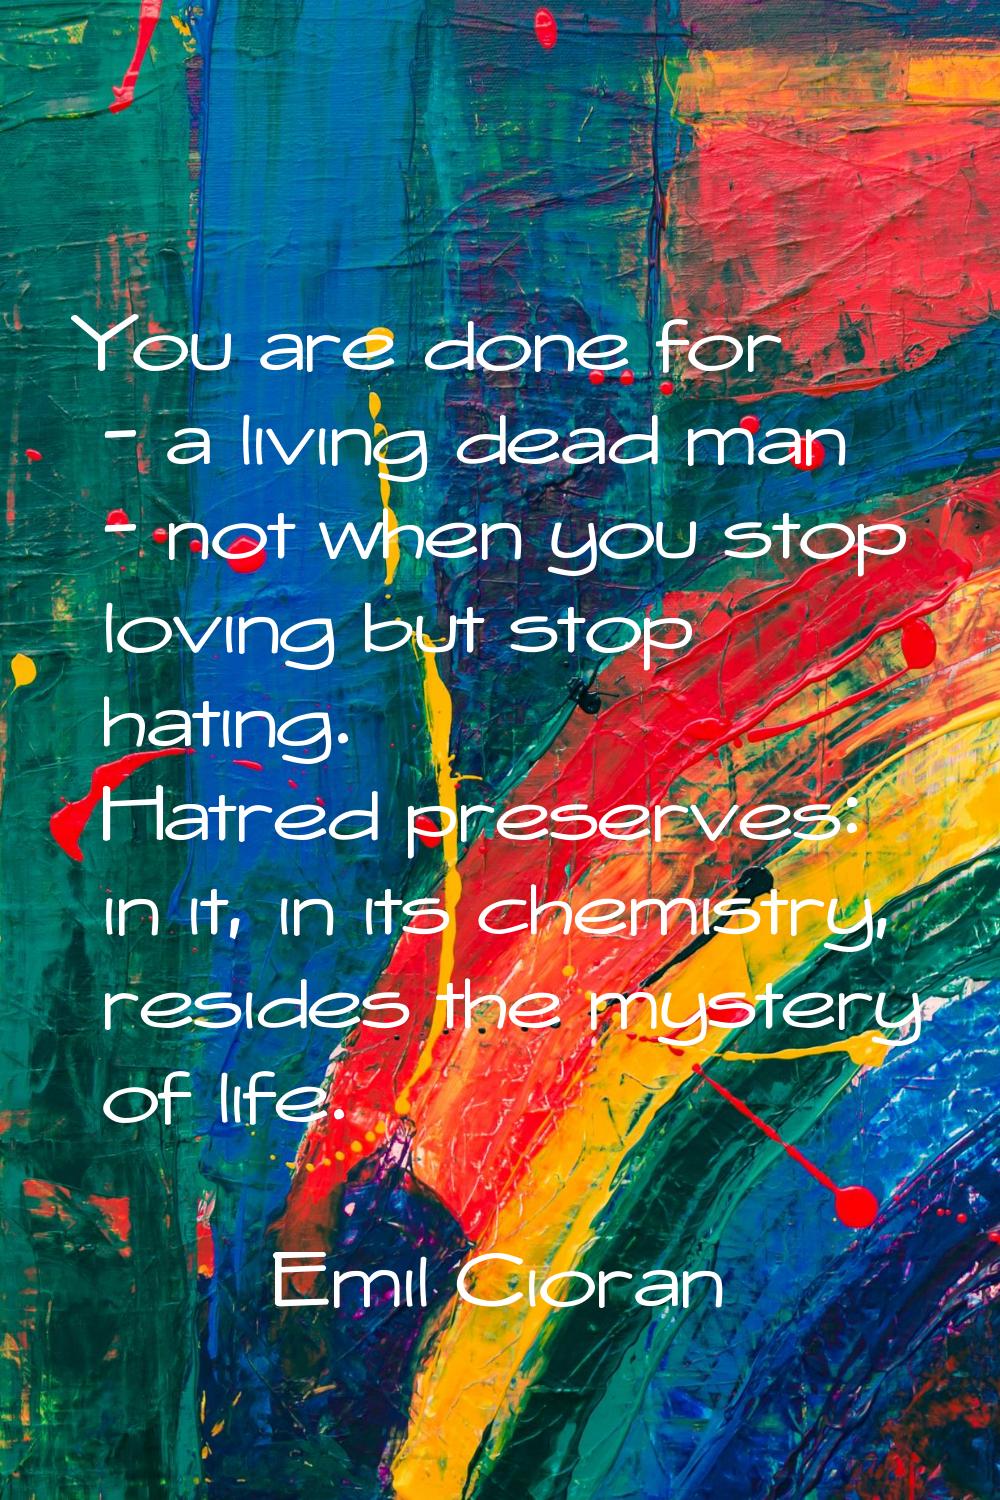 You are done for - a living dead man - not when you stop loving but stop hating. Hatred preserves: 